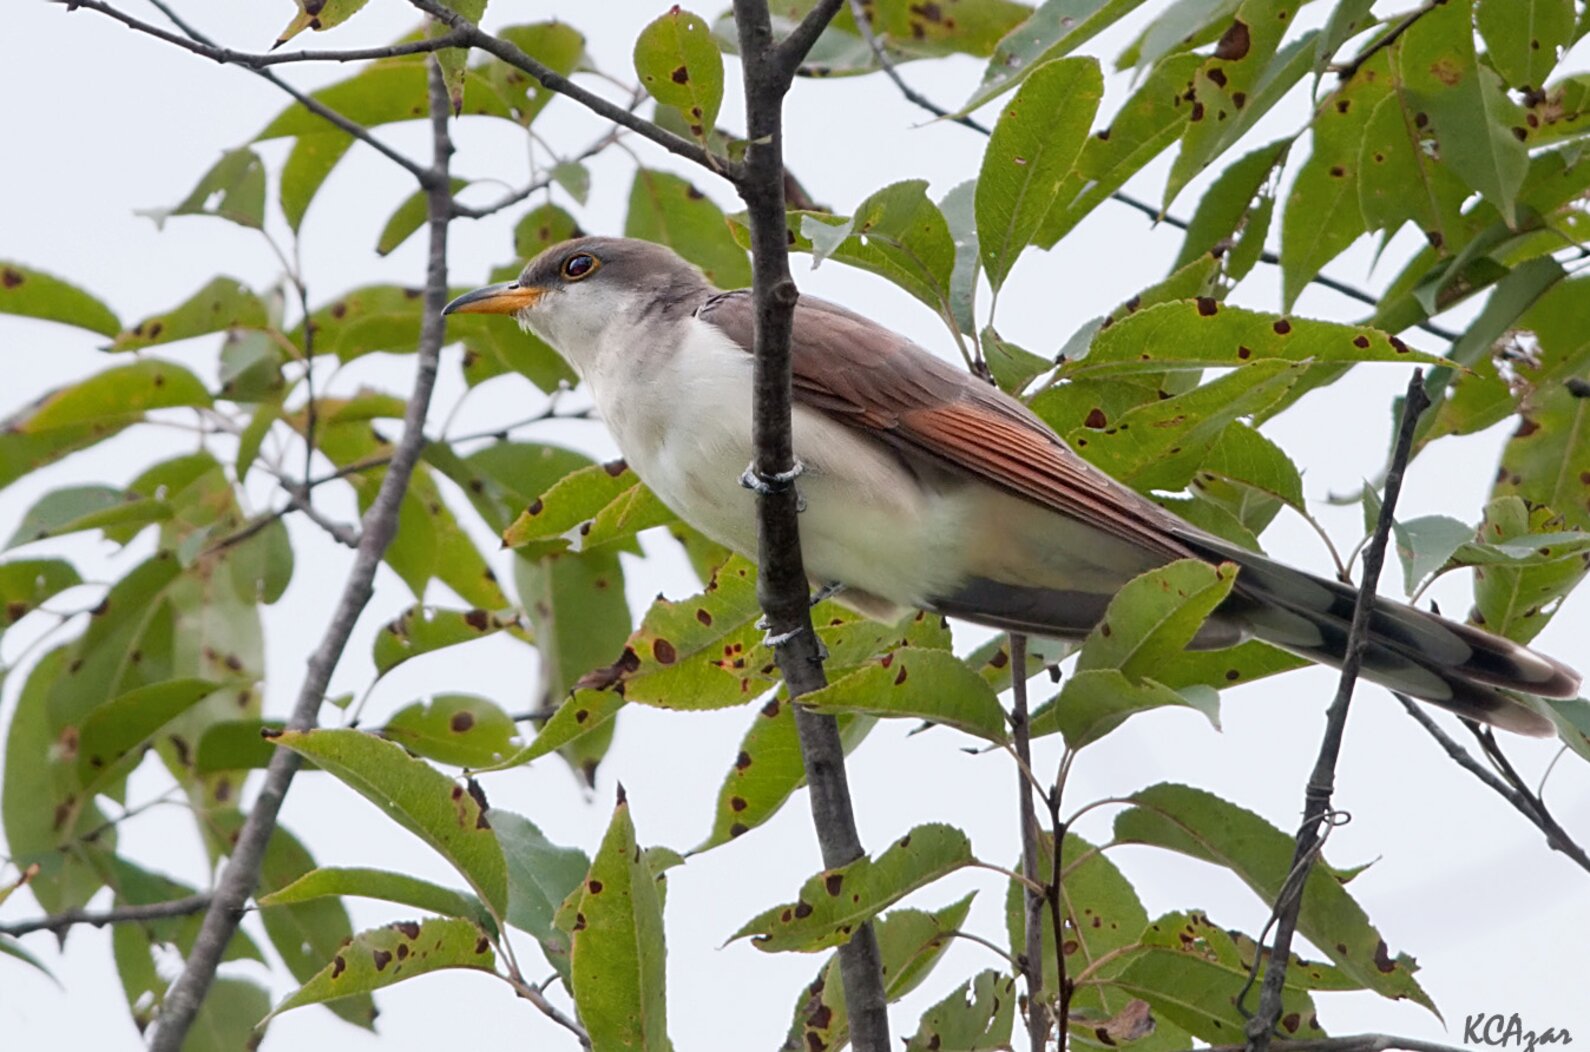 Listen for the slow "cuk cuk cuk" of the Yellow-billed Cuckoo at Mount Loretto. Photo: Kelly Colgand Azar/CC BY-ND 2.0